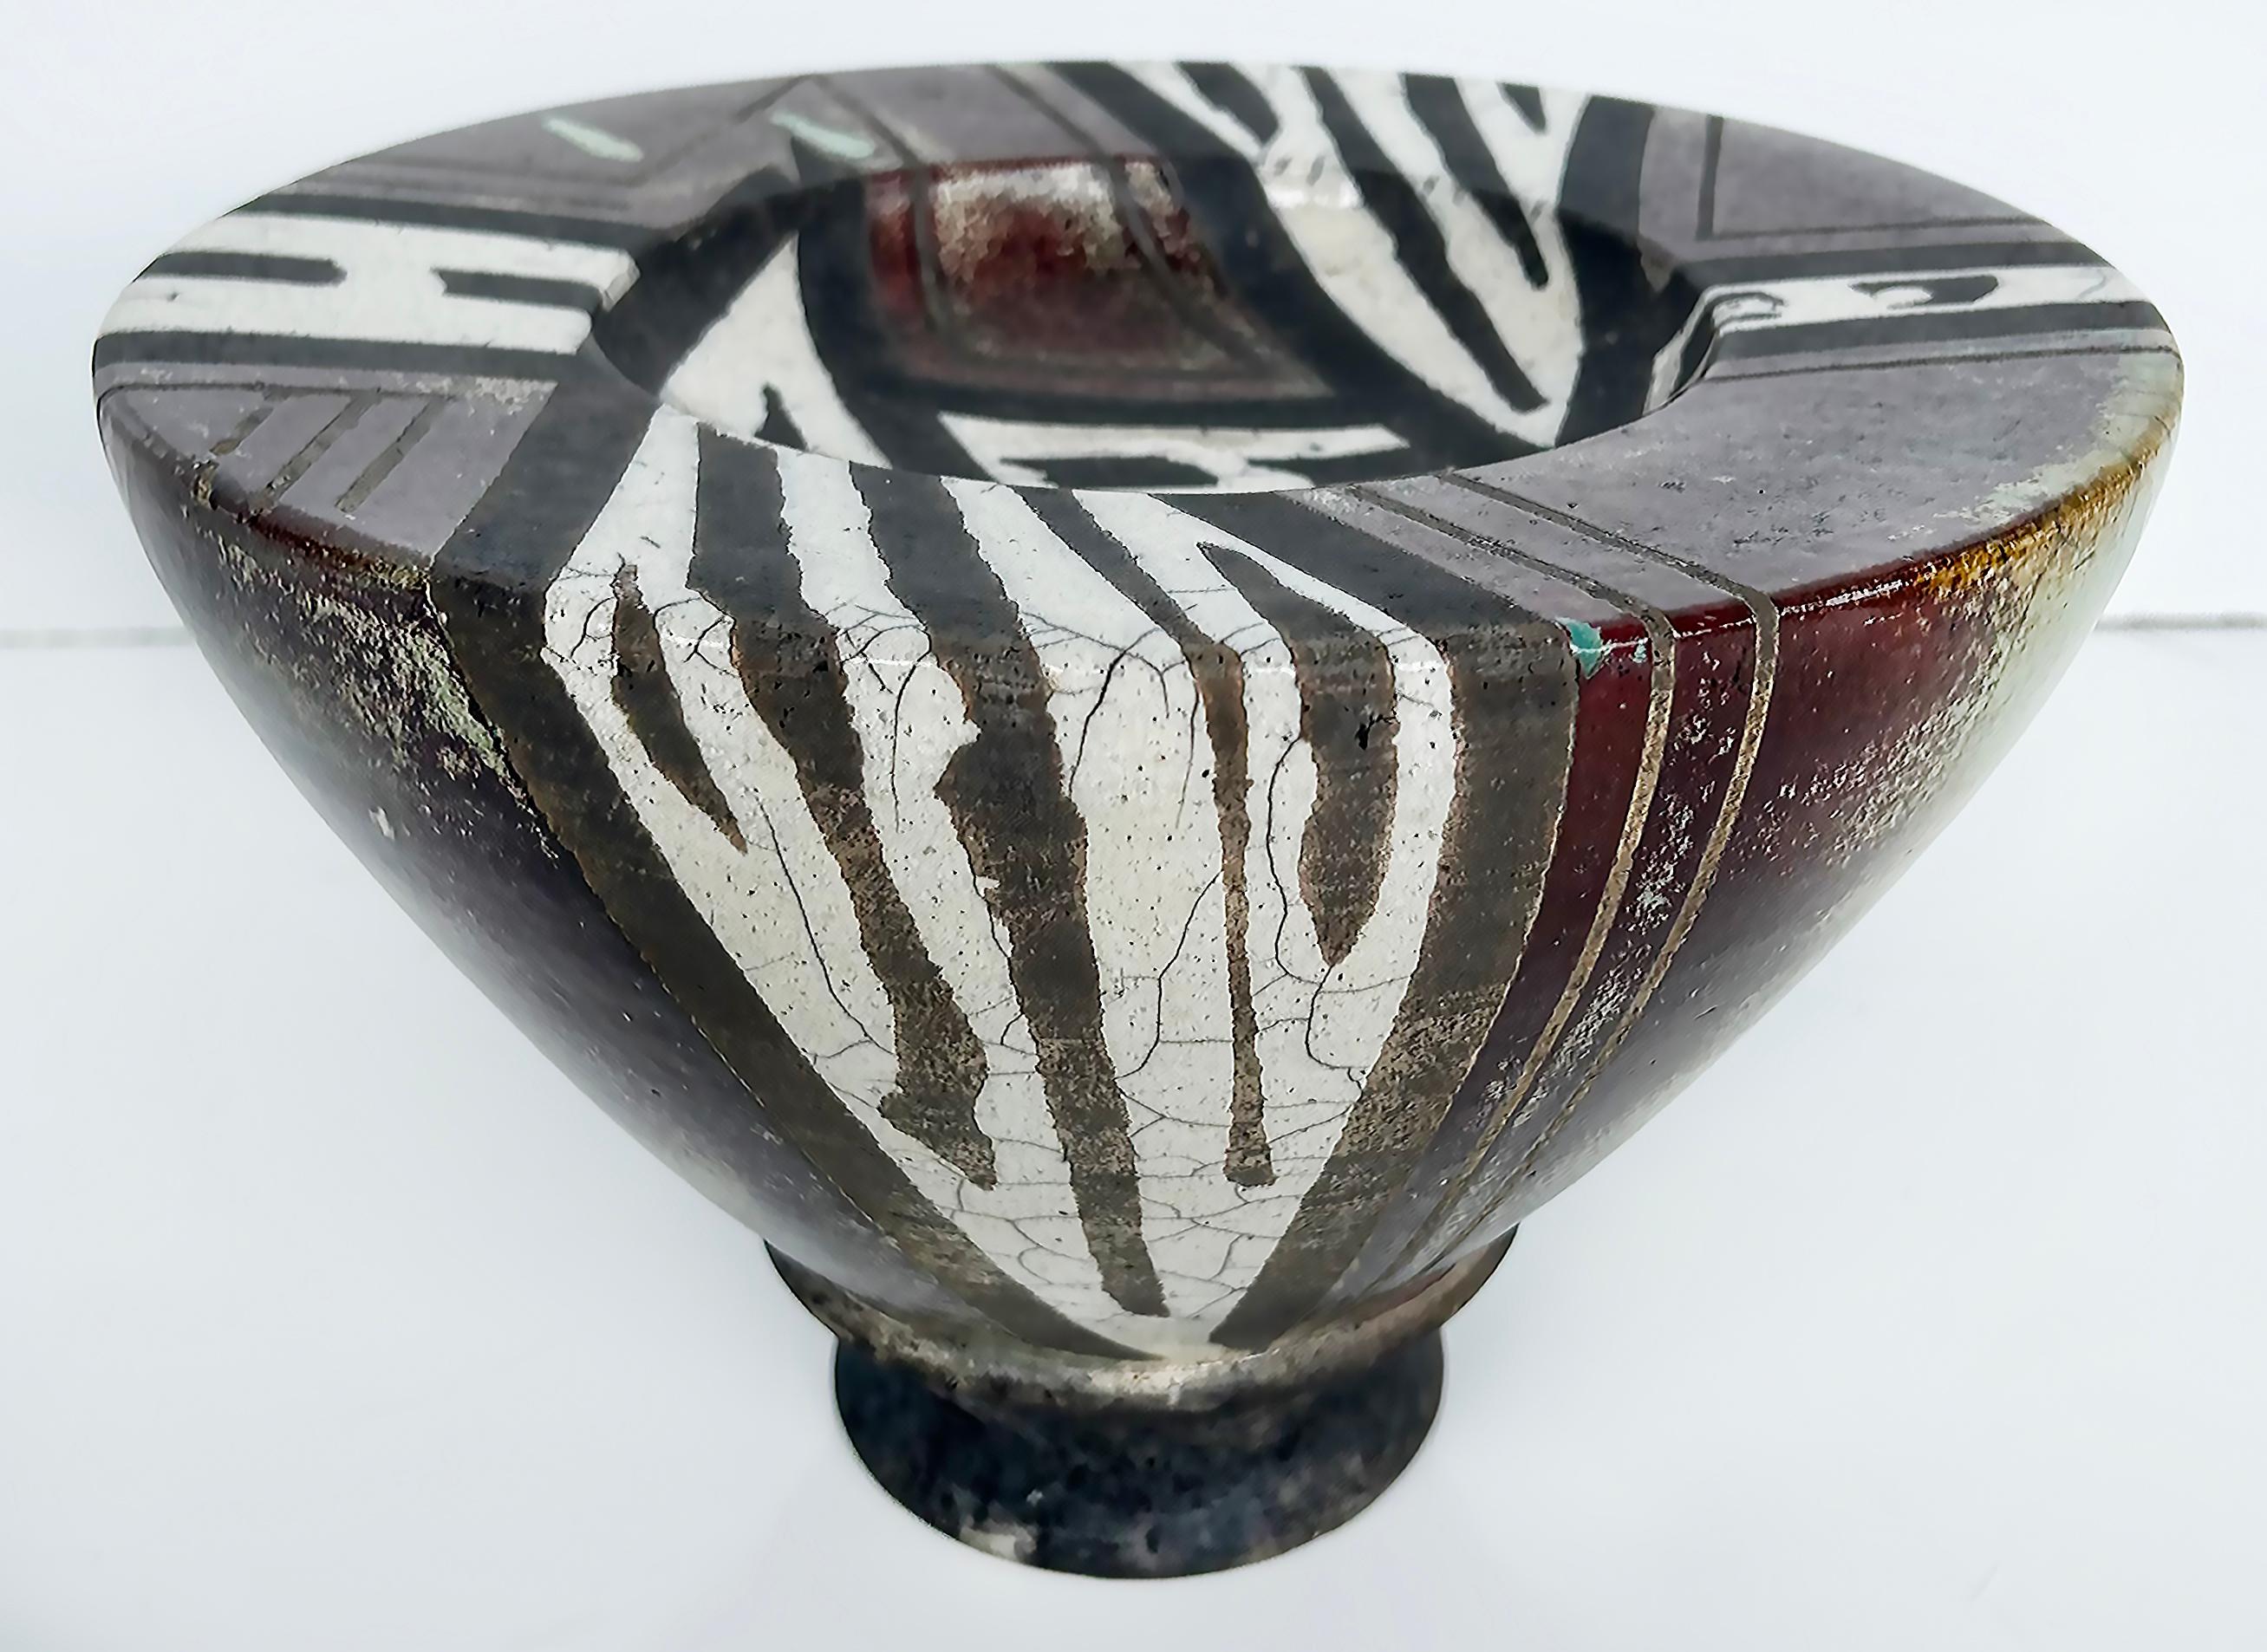 Japanese Glazed and Painted Centerpiece Bowl Object, Fish Logo

Offered for sale is a mid-20th century Japanese very decorative glazed and painted ceramic Objet d'art with a bowl-form top. The work uses many glazes to create interest and the base is